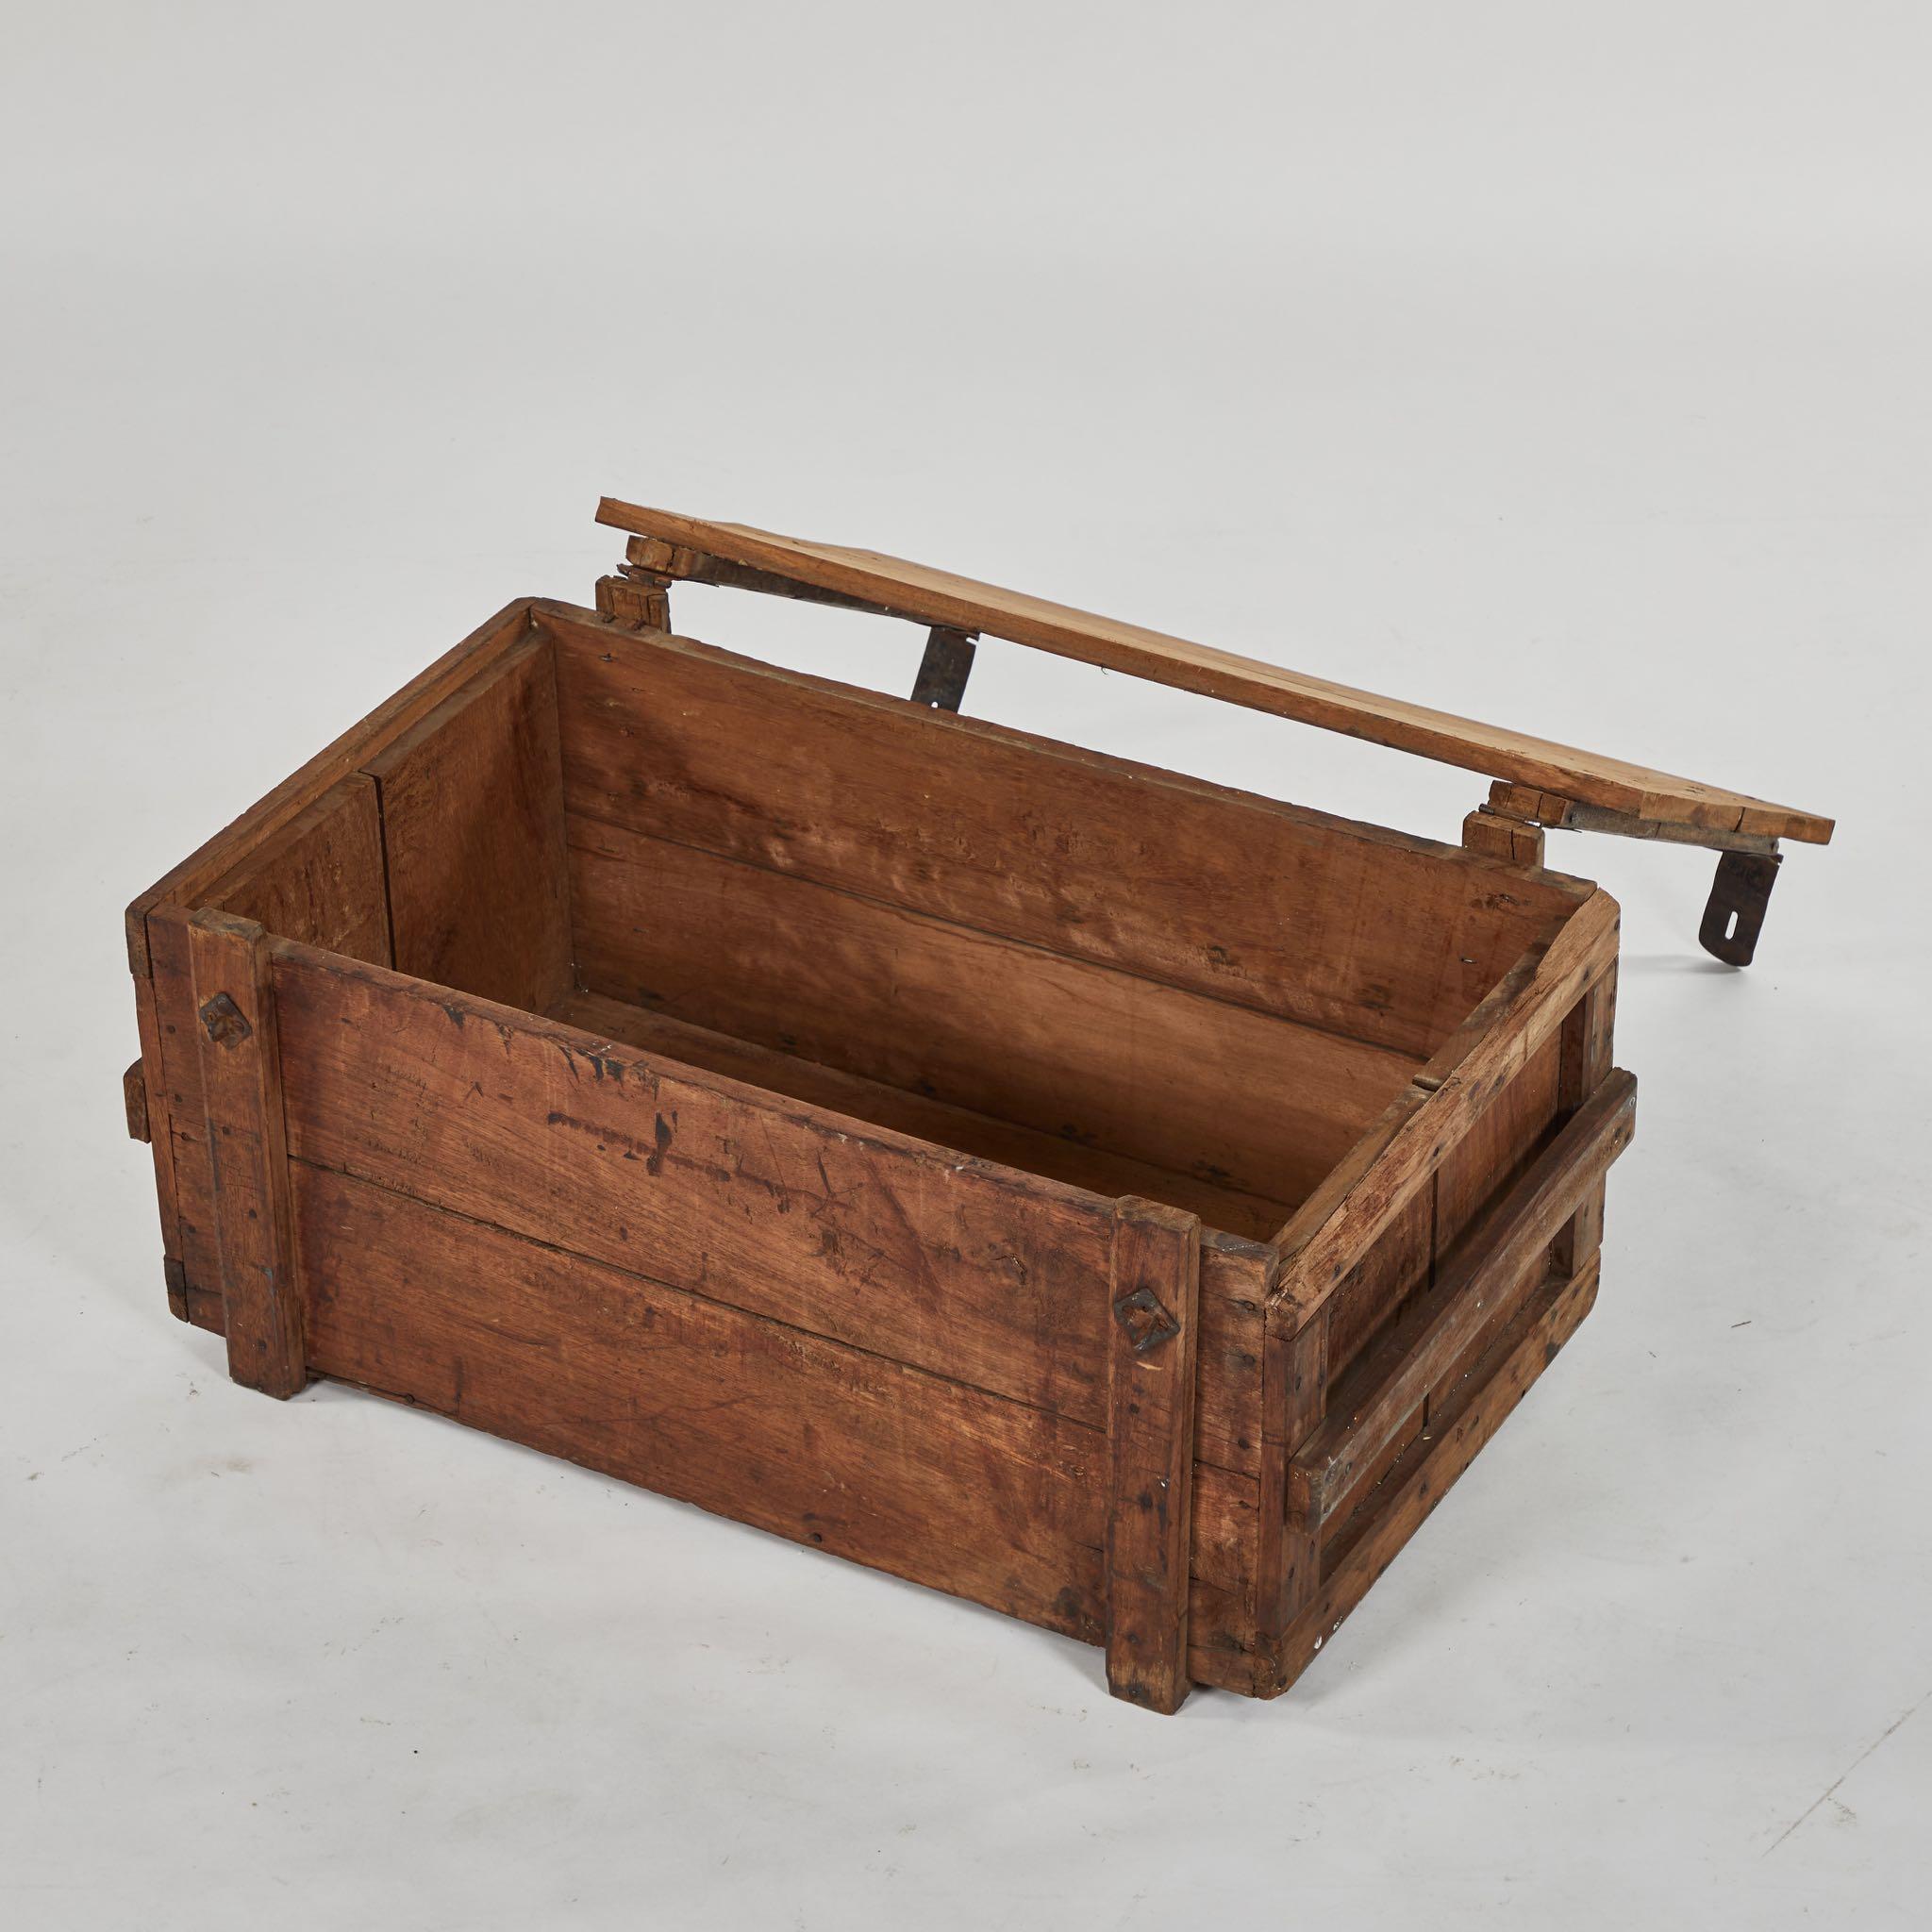 A rustic chest as a coffee table, originating in England, circa 1890.